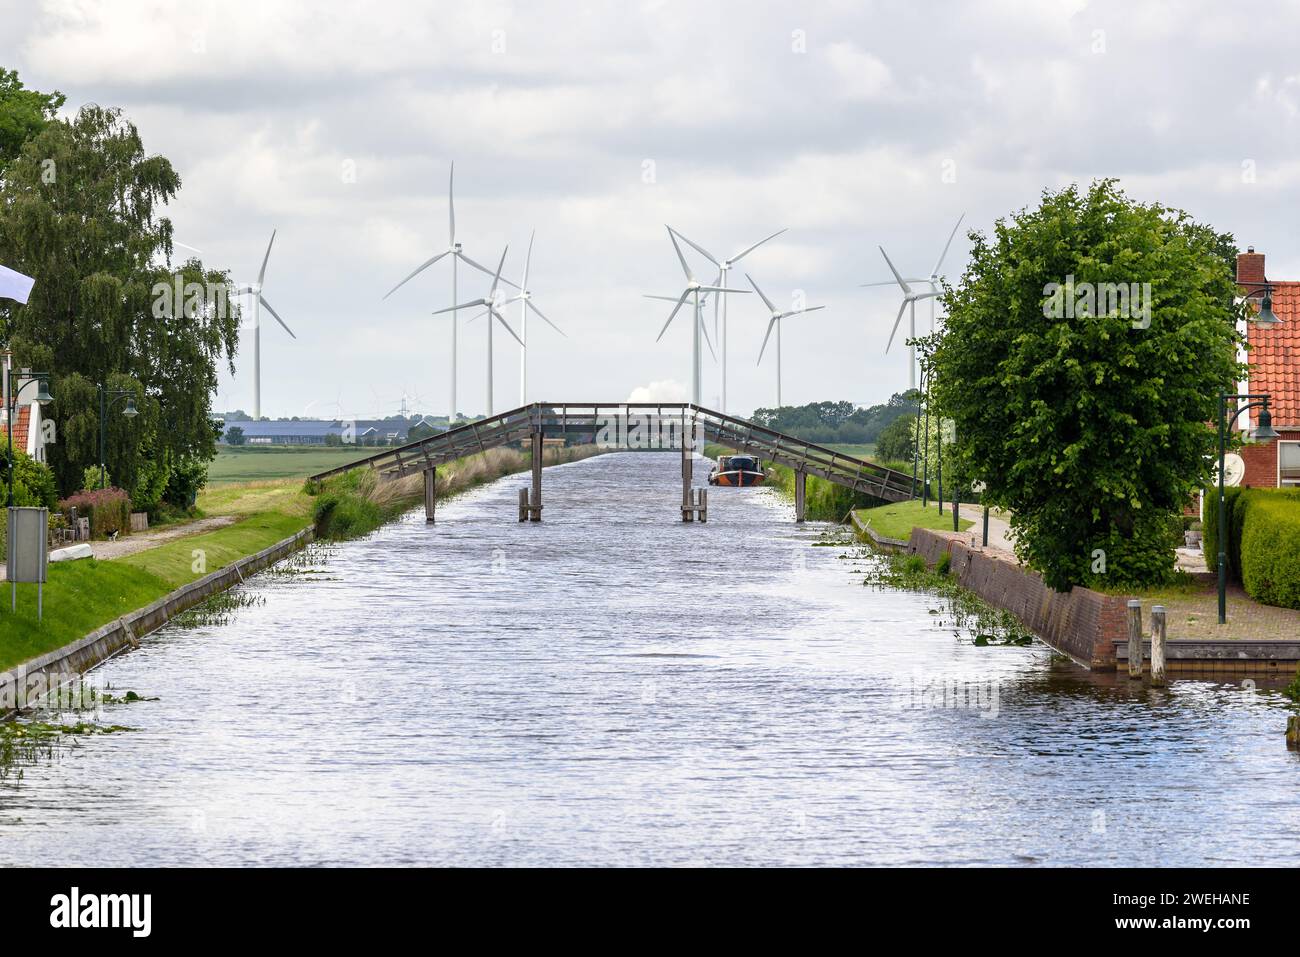 Wooden footbridge over a canal with wind turbines in background on a cloudy summer day Stock Photo